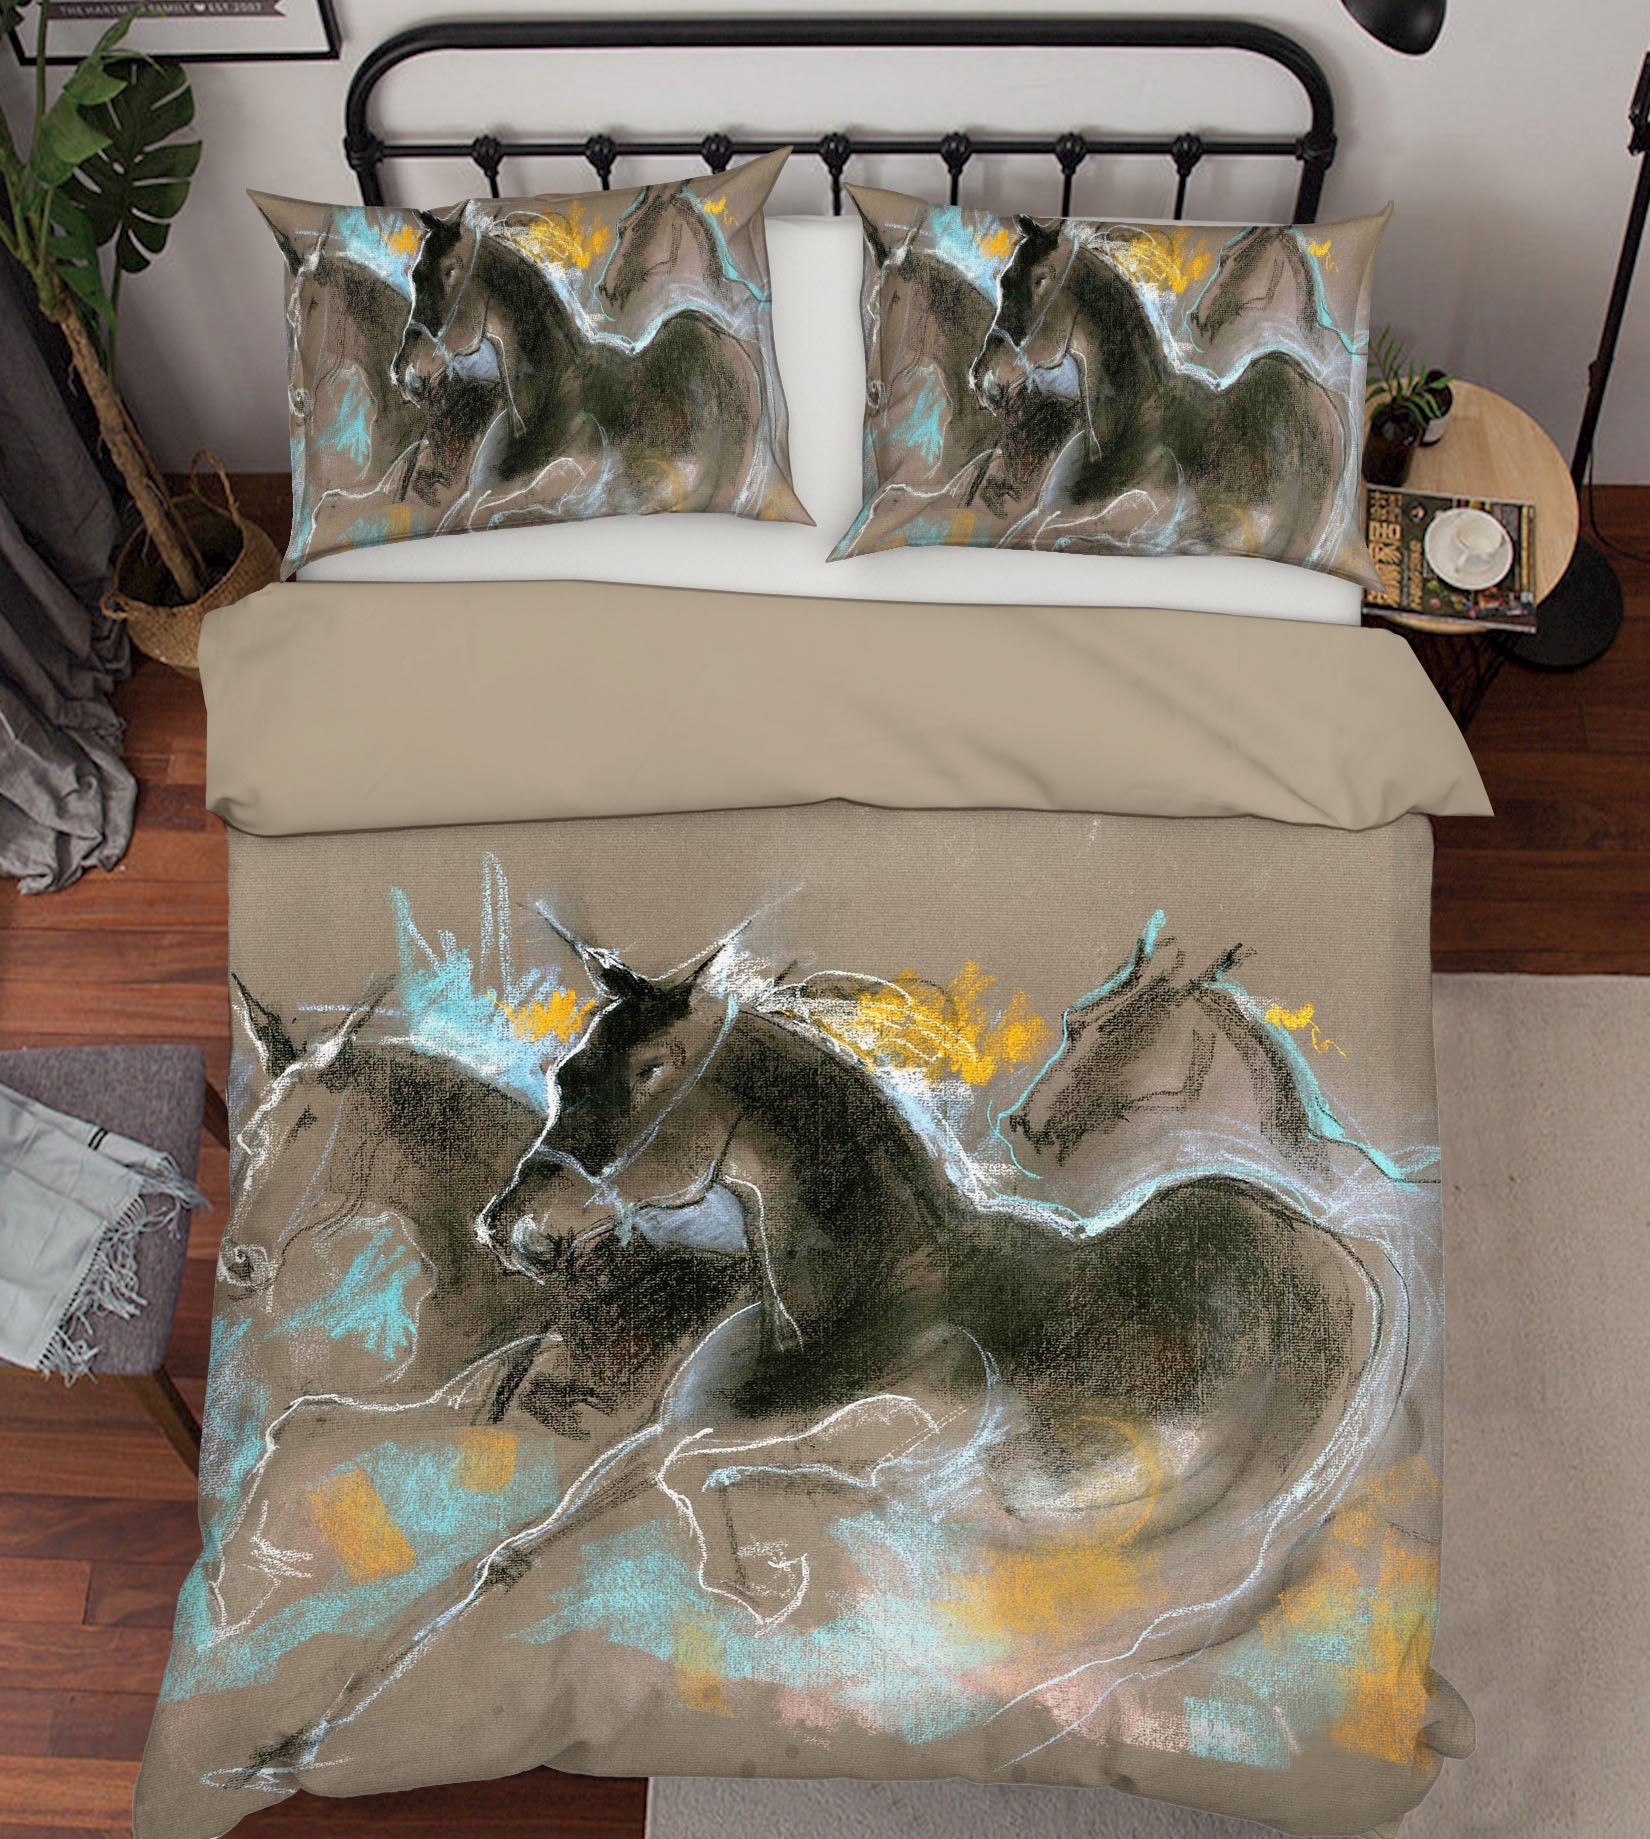 3D Running Horse 2013 Anne Farrall Doyle Bedding Bed Pillowcases Quilt